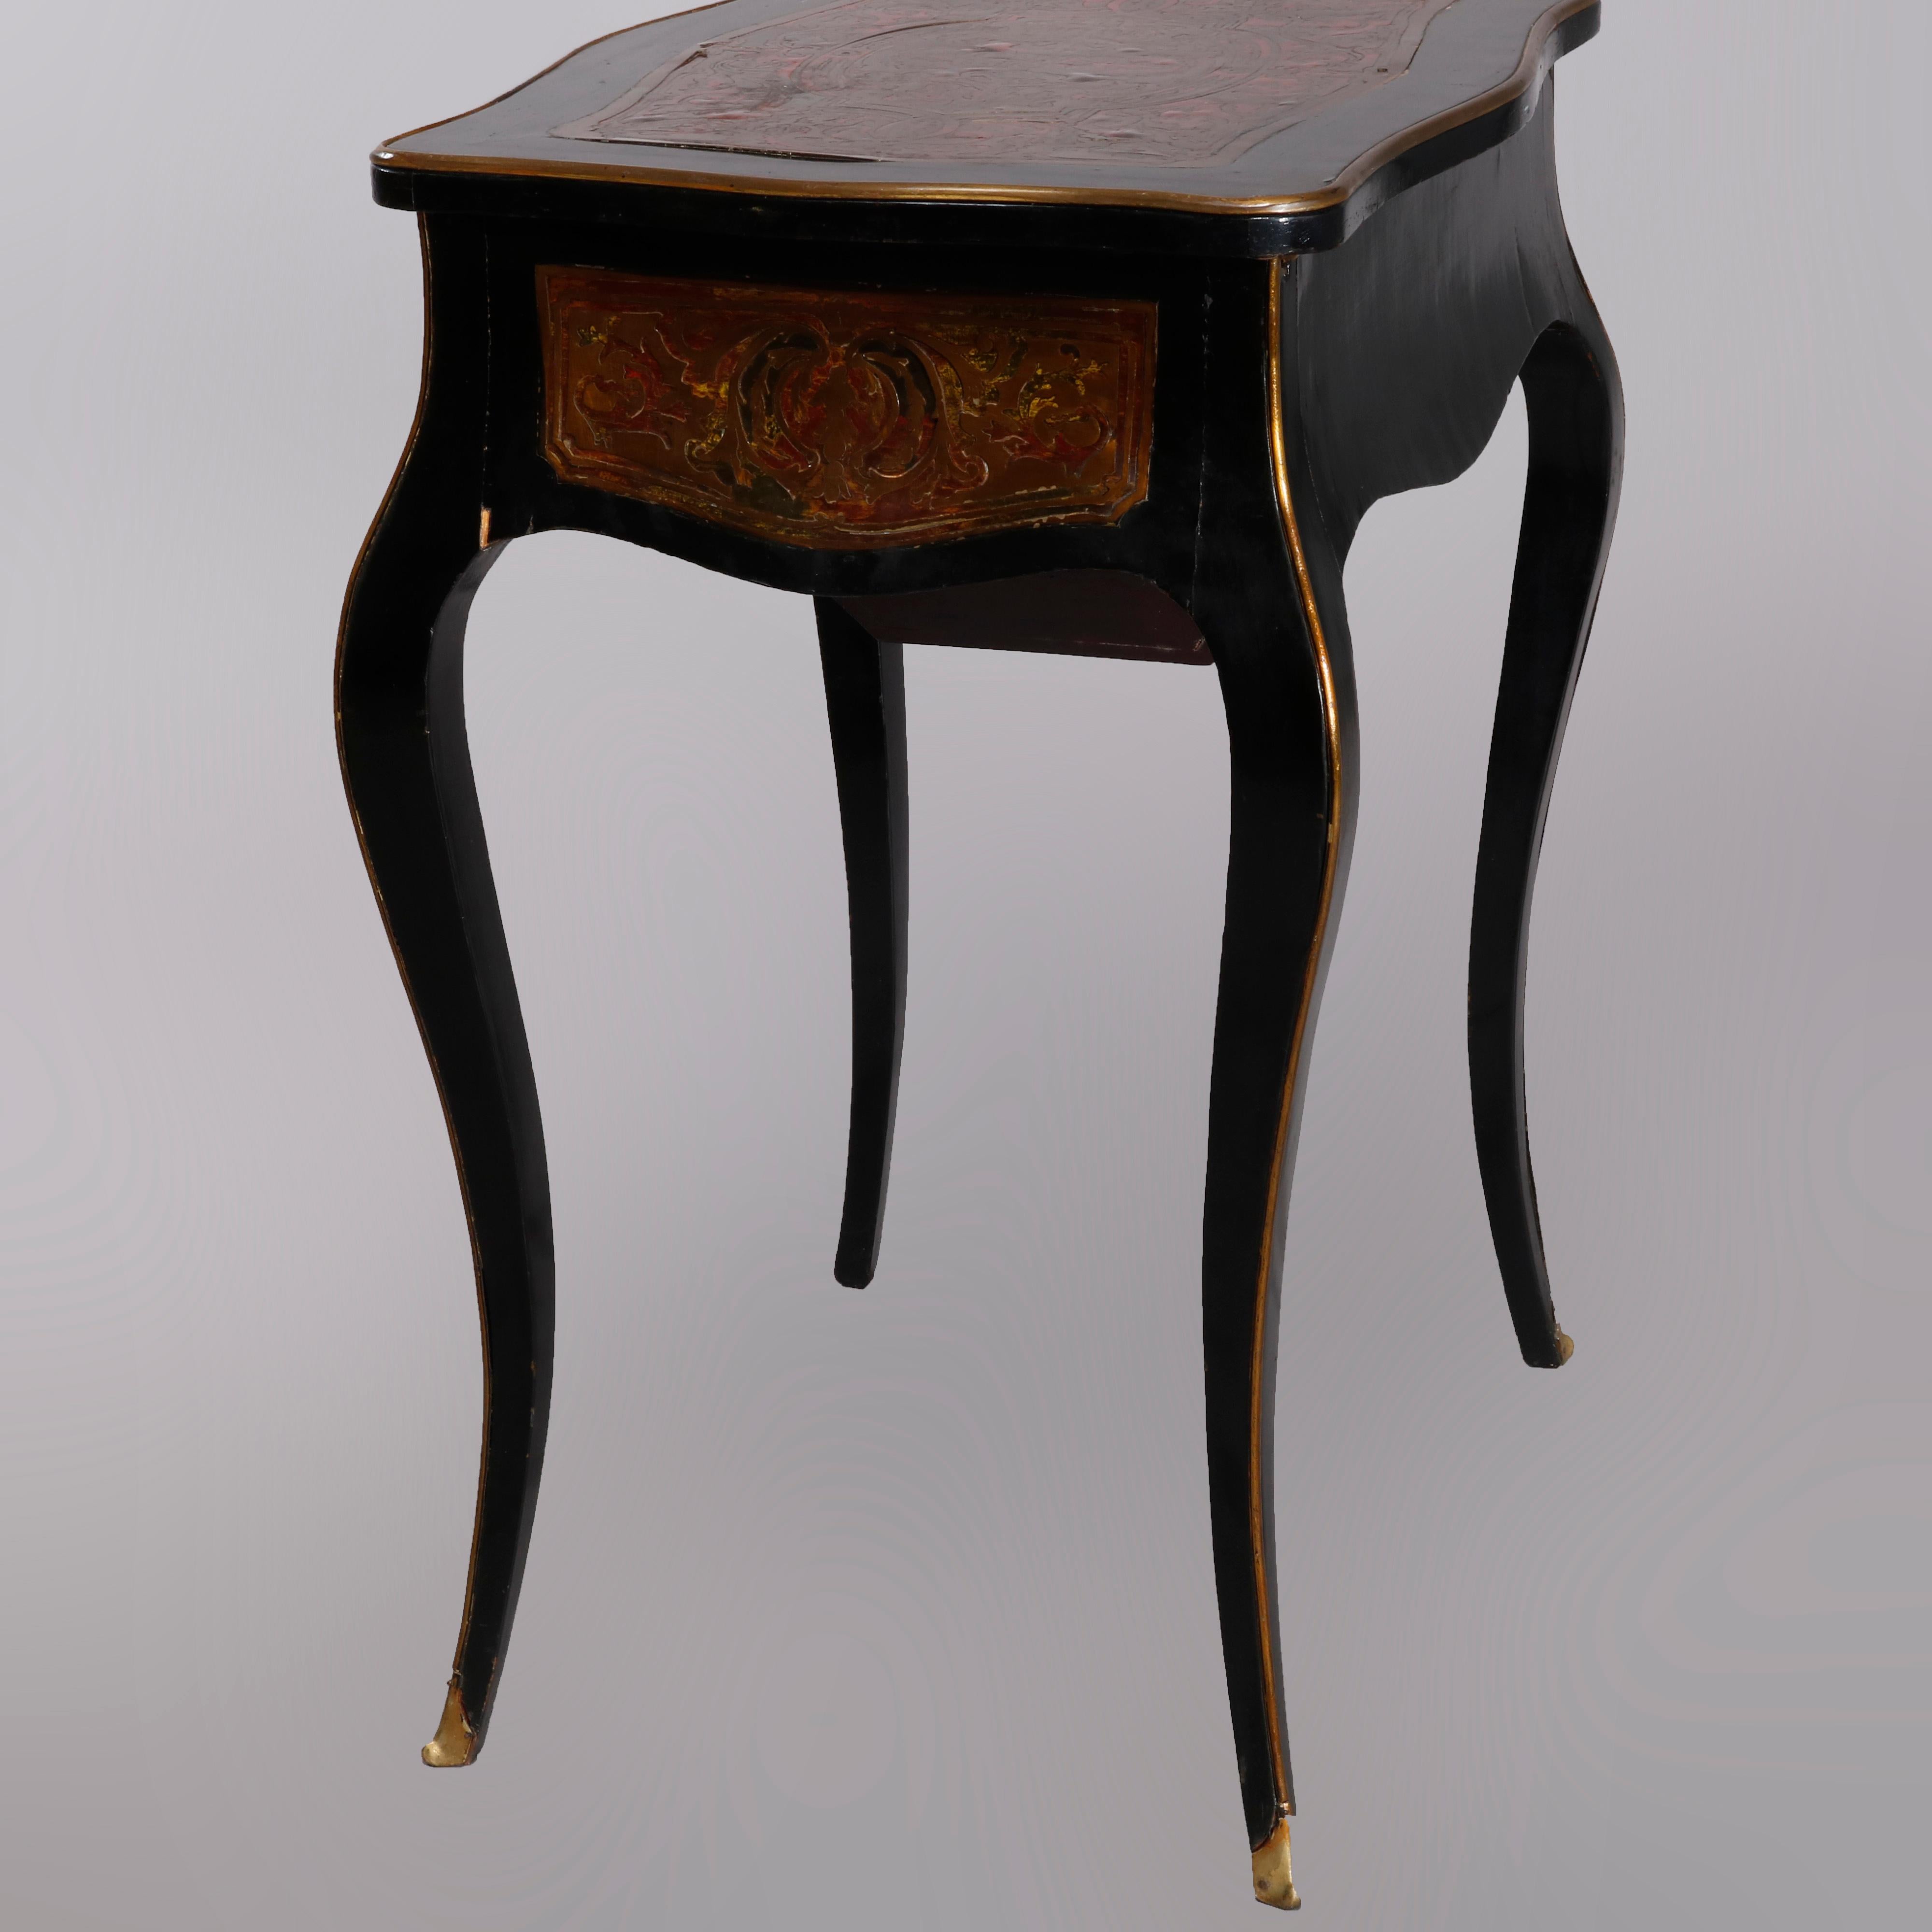 19th Century Antique Napoleon III Boulle and Tortoise Shell Ebonized Sewing Stand, circa 1870